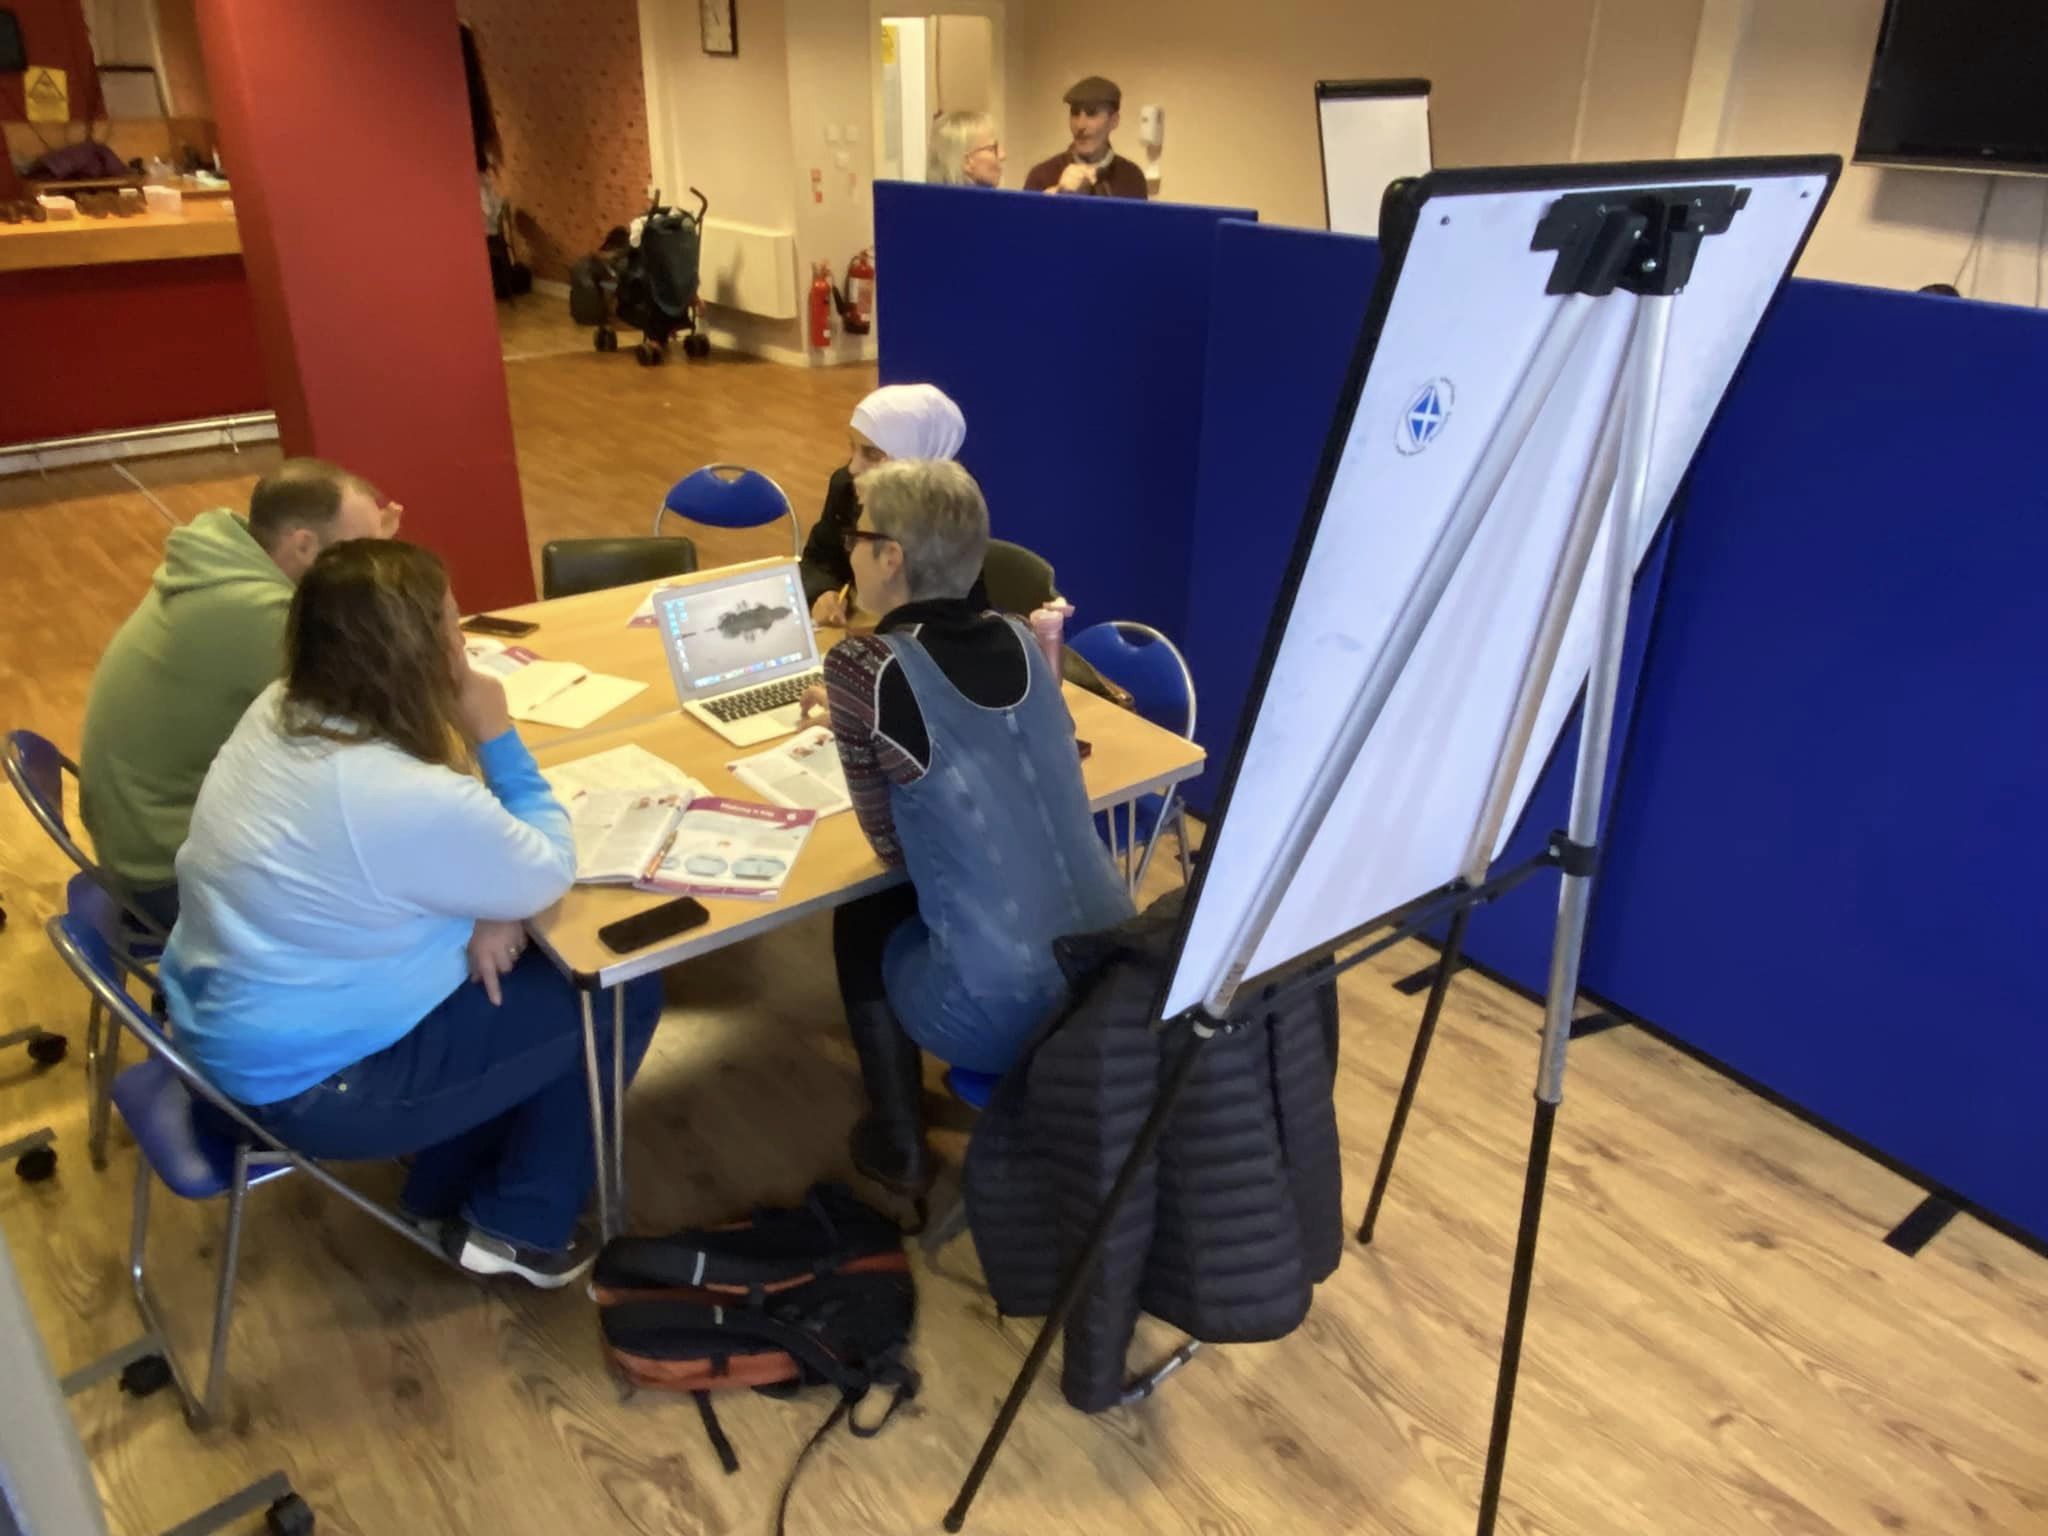 People sitting at a table with a flipchart at the top of the table. The people are in a large room with red pillars.